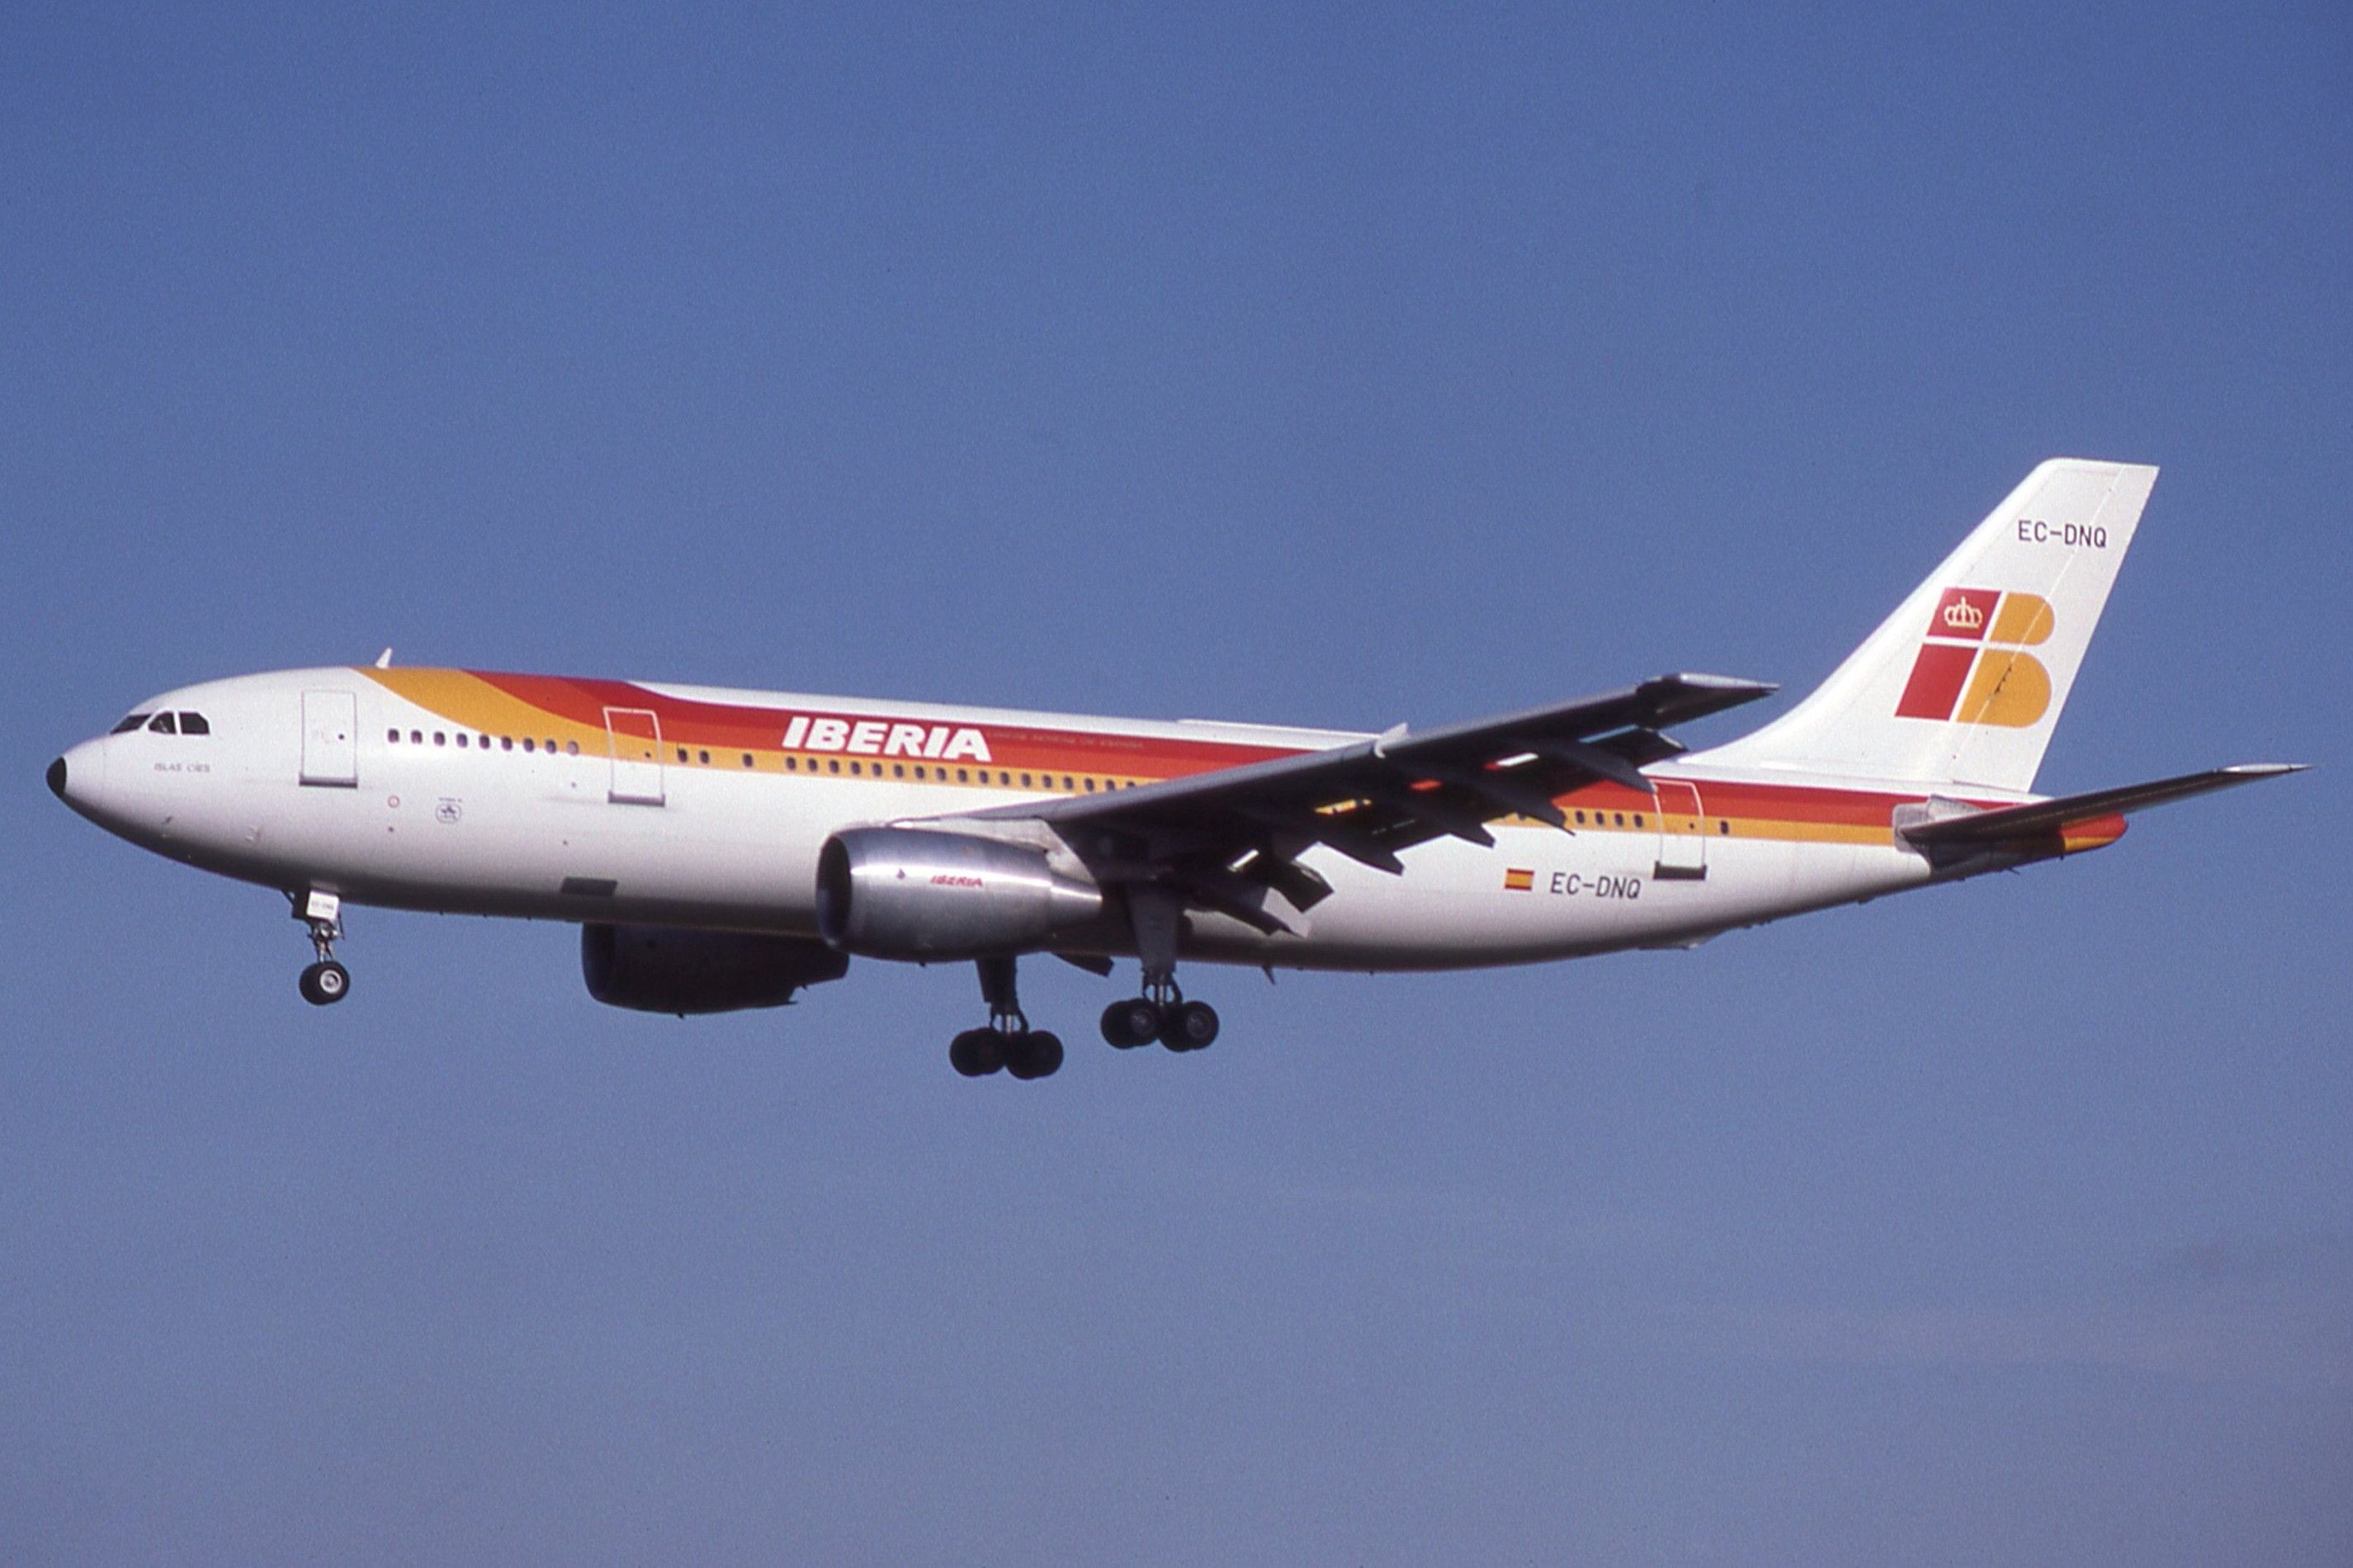 An Iberia Airbus A300 flying in the sky.